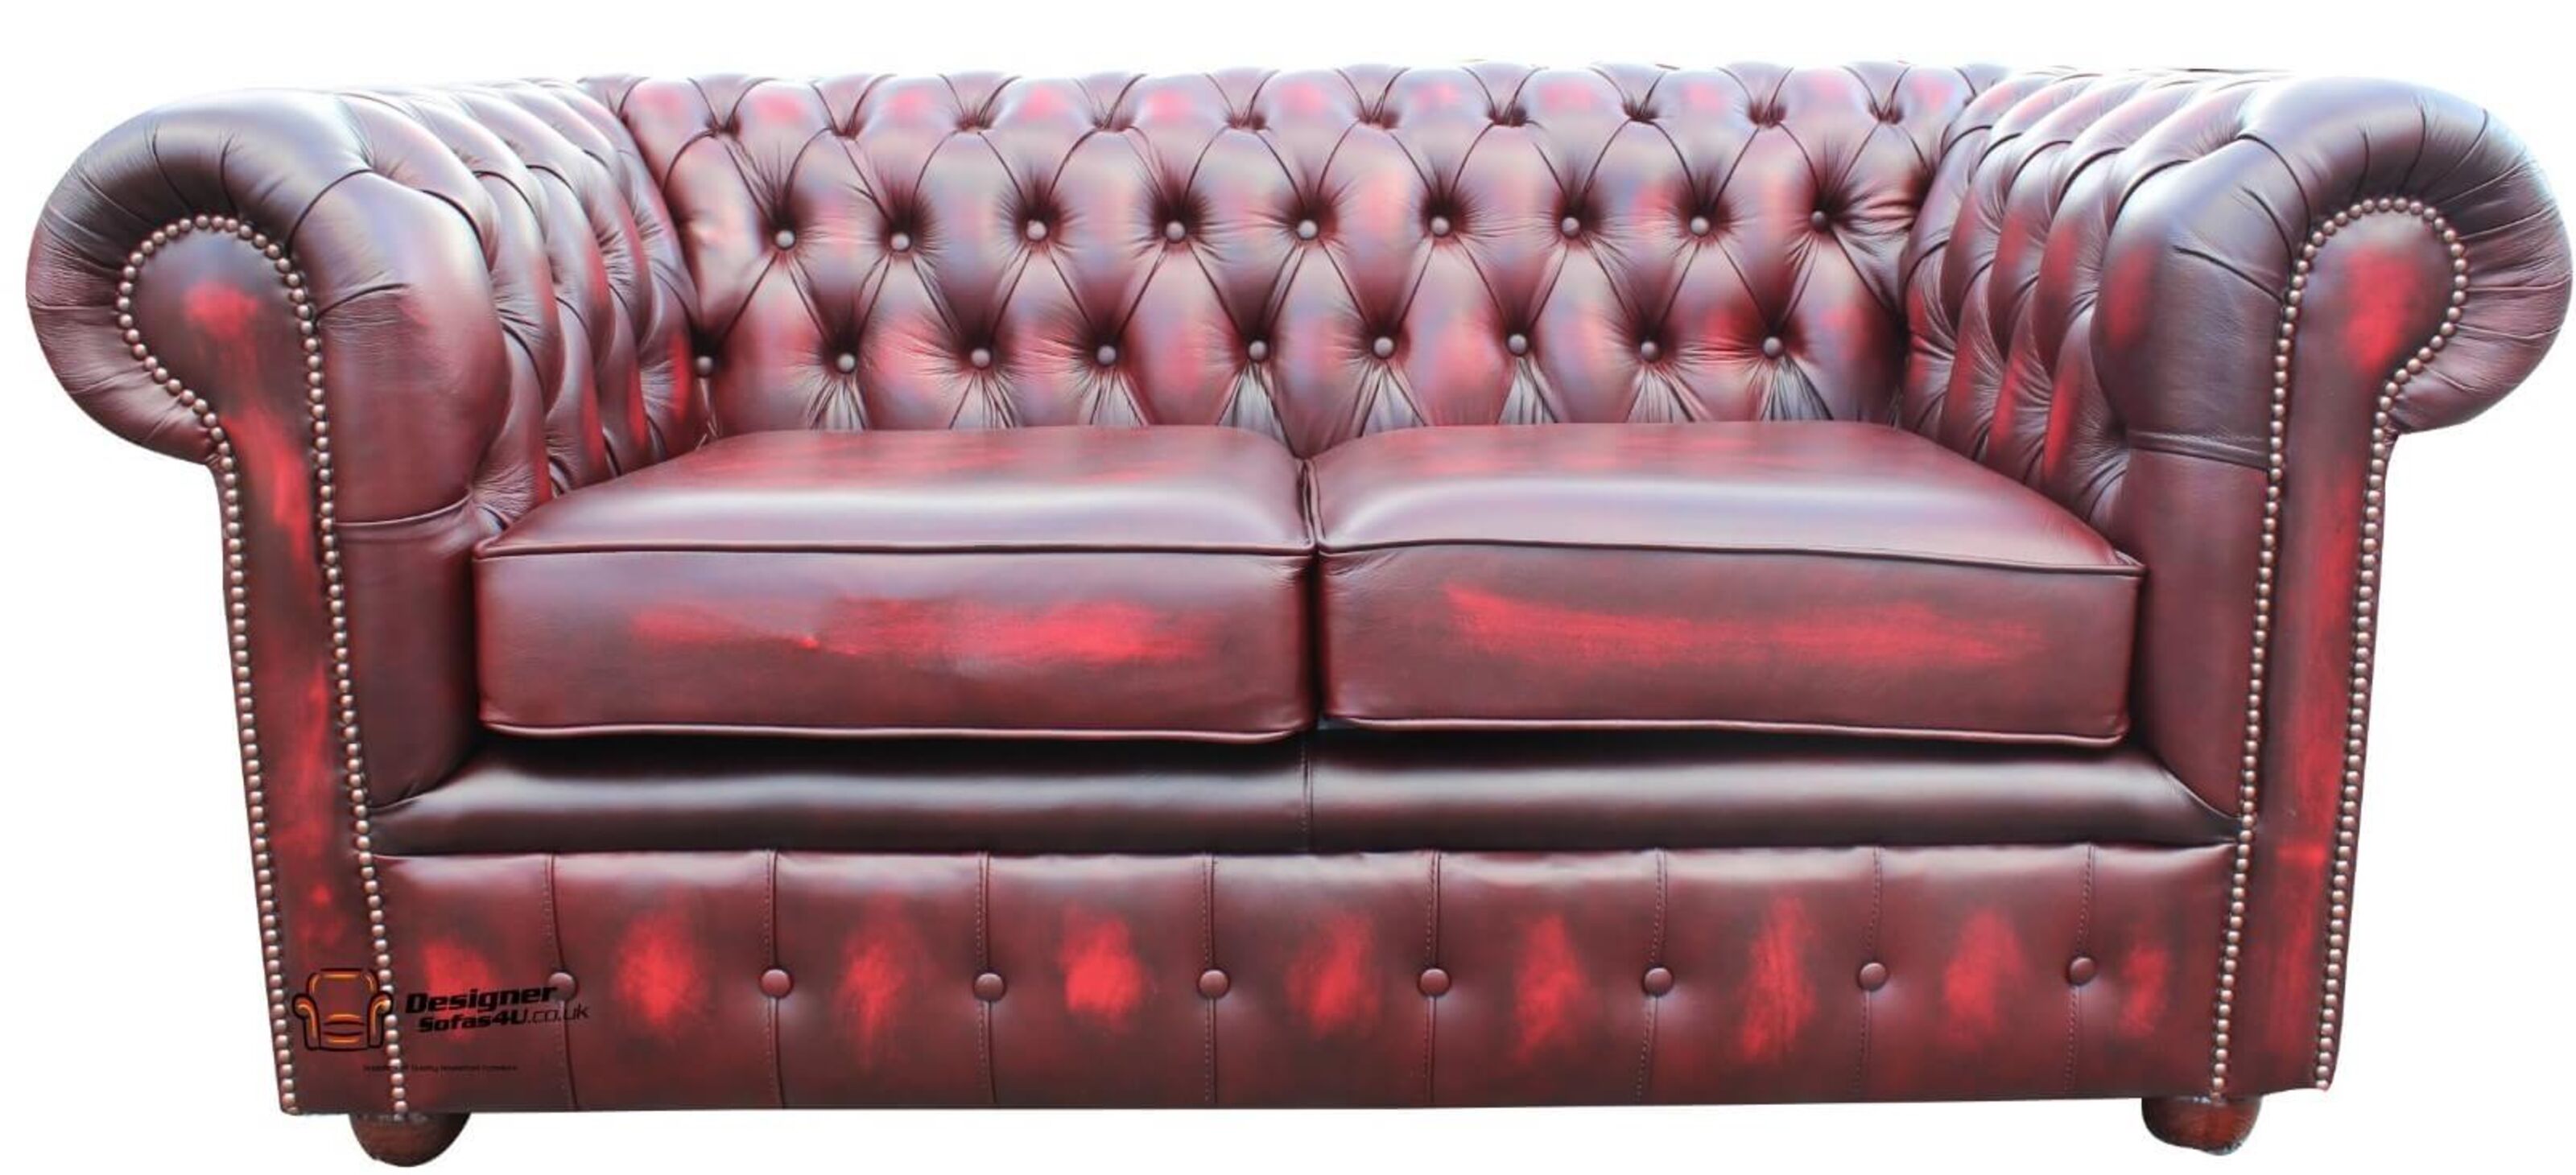 Exclusive Deals Chesterfield Sofas for Sale on eBay  %Post Title